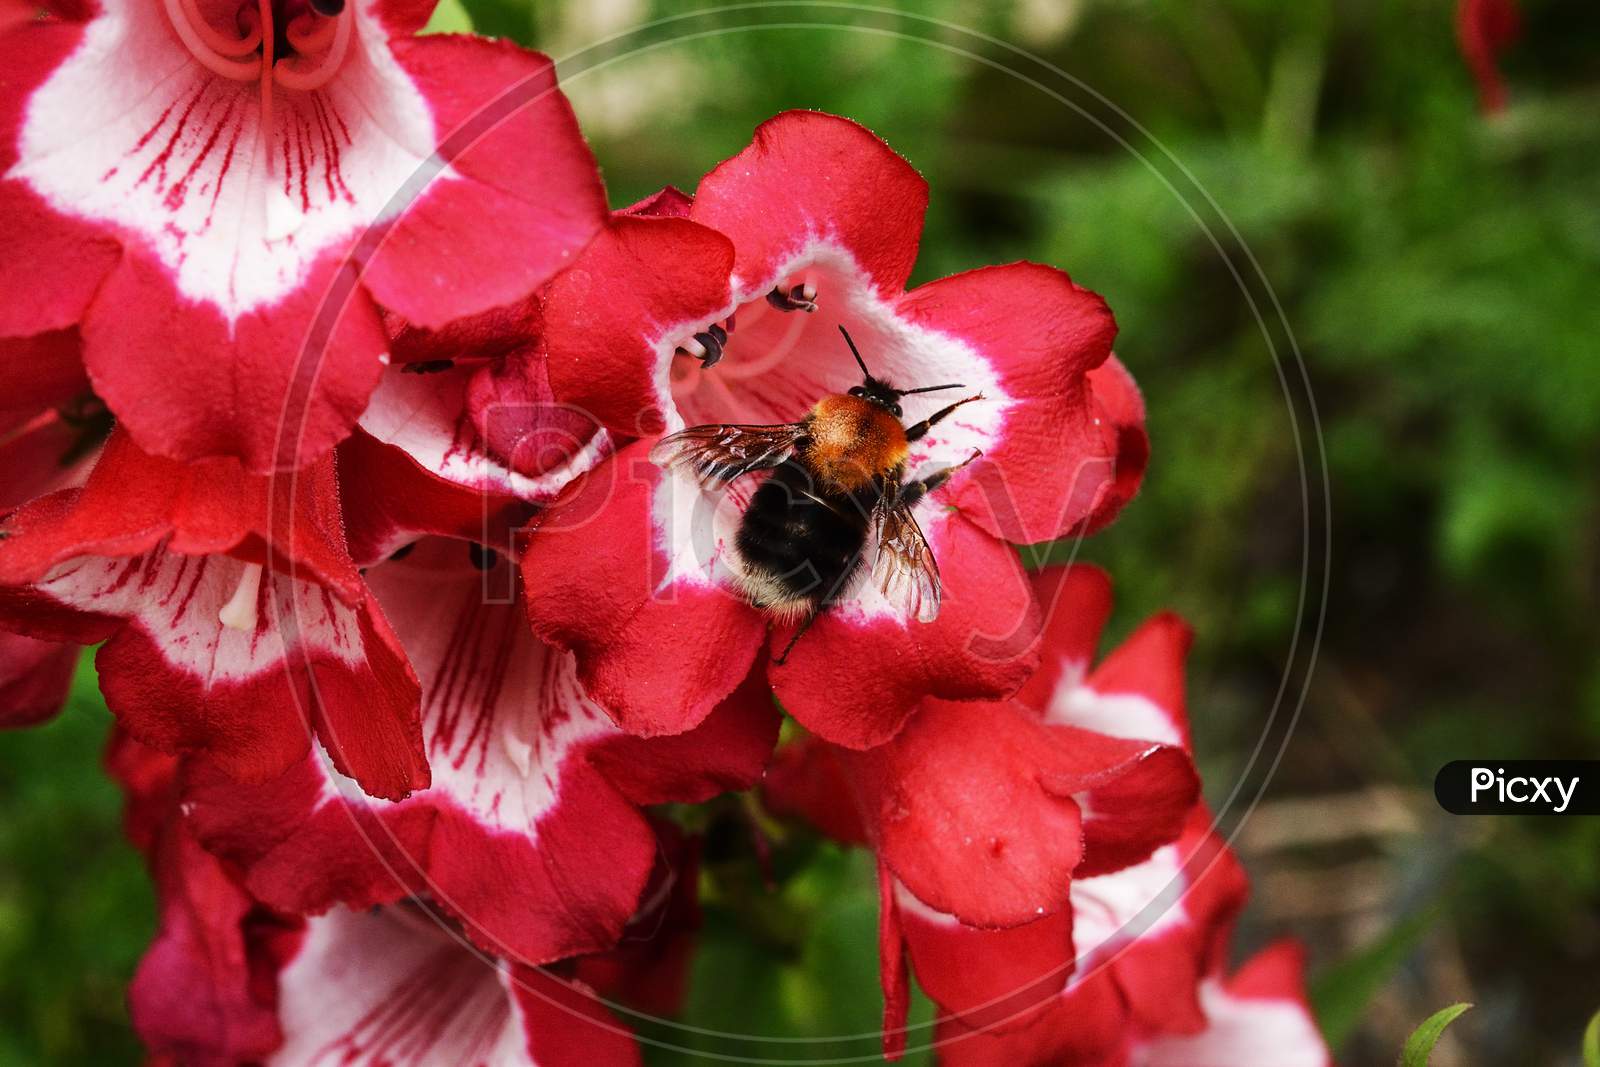 A tiny Honeybee on a red in search of honey